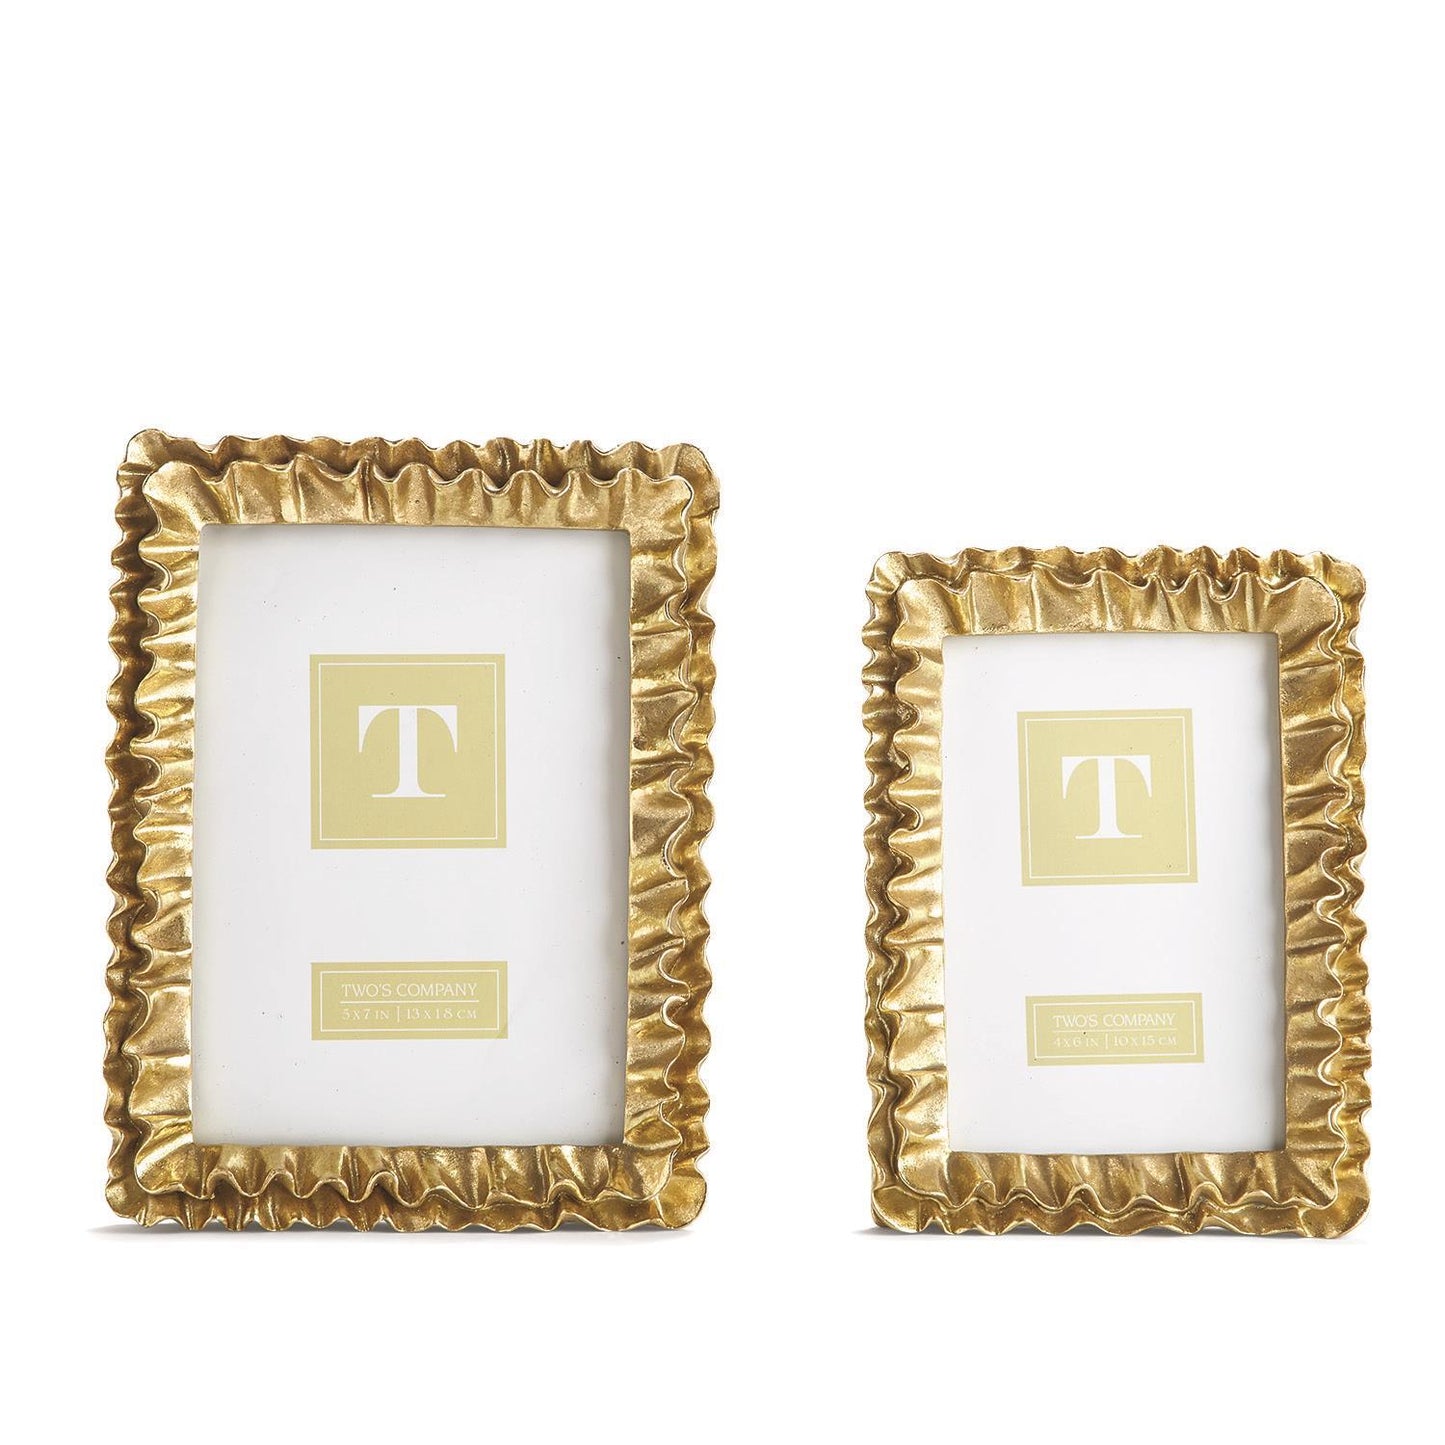 Two's Company Gold Ruffles Frames Includes 2 Sizes, Set of 2